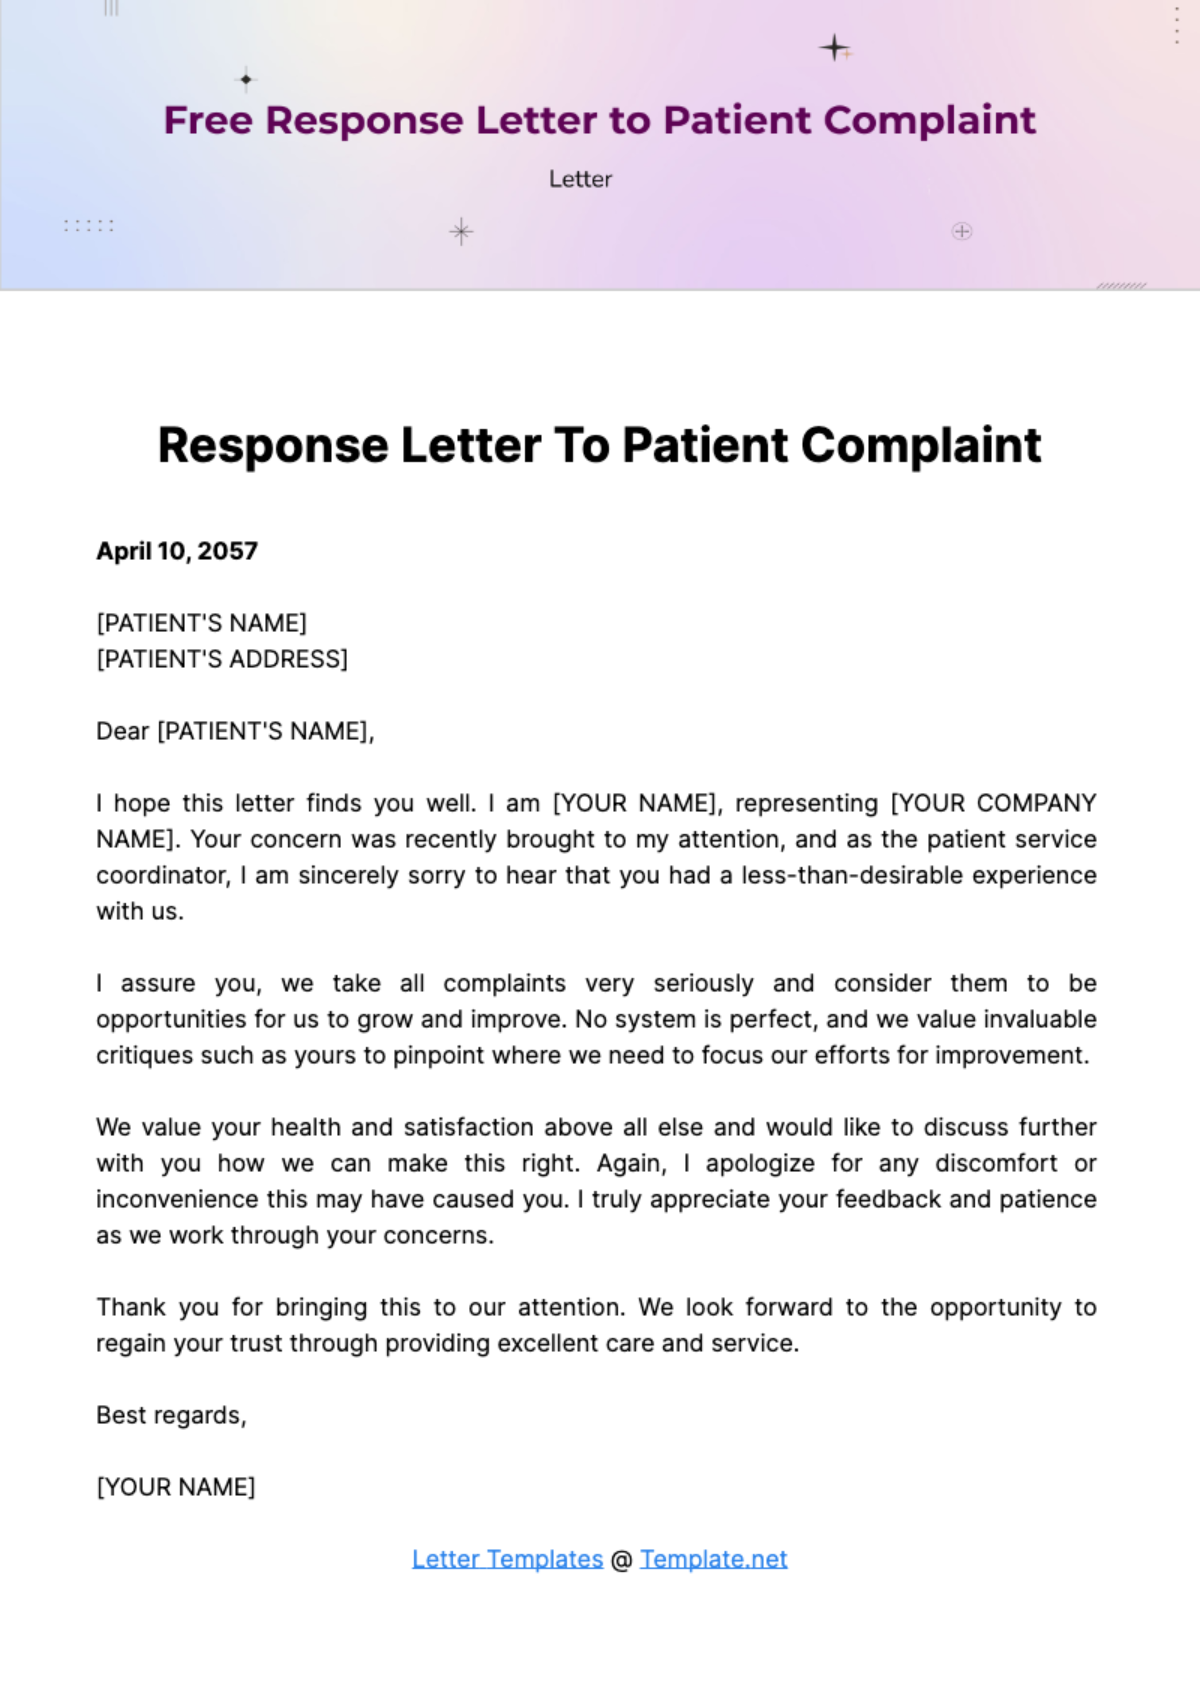 Free Response Letter to Patient Complaint Template